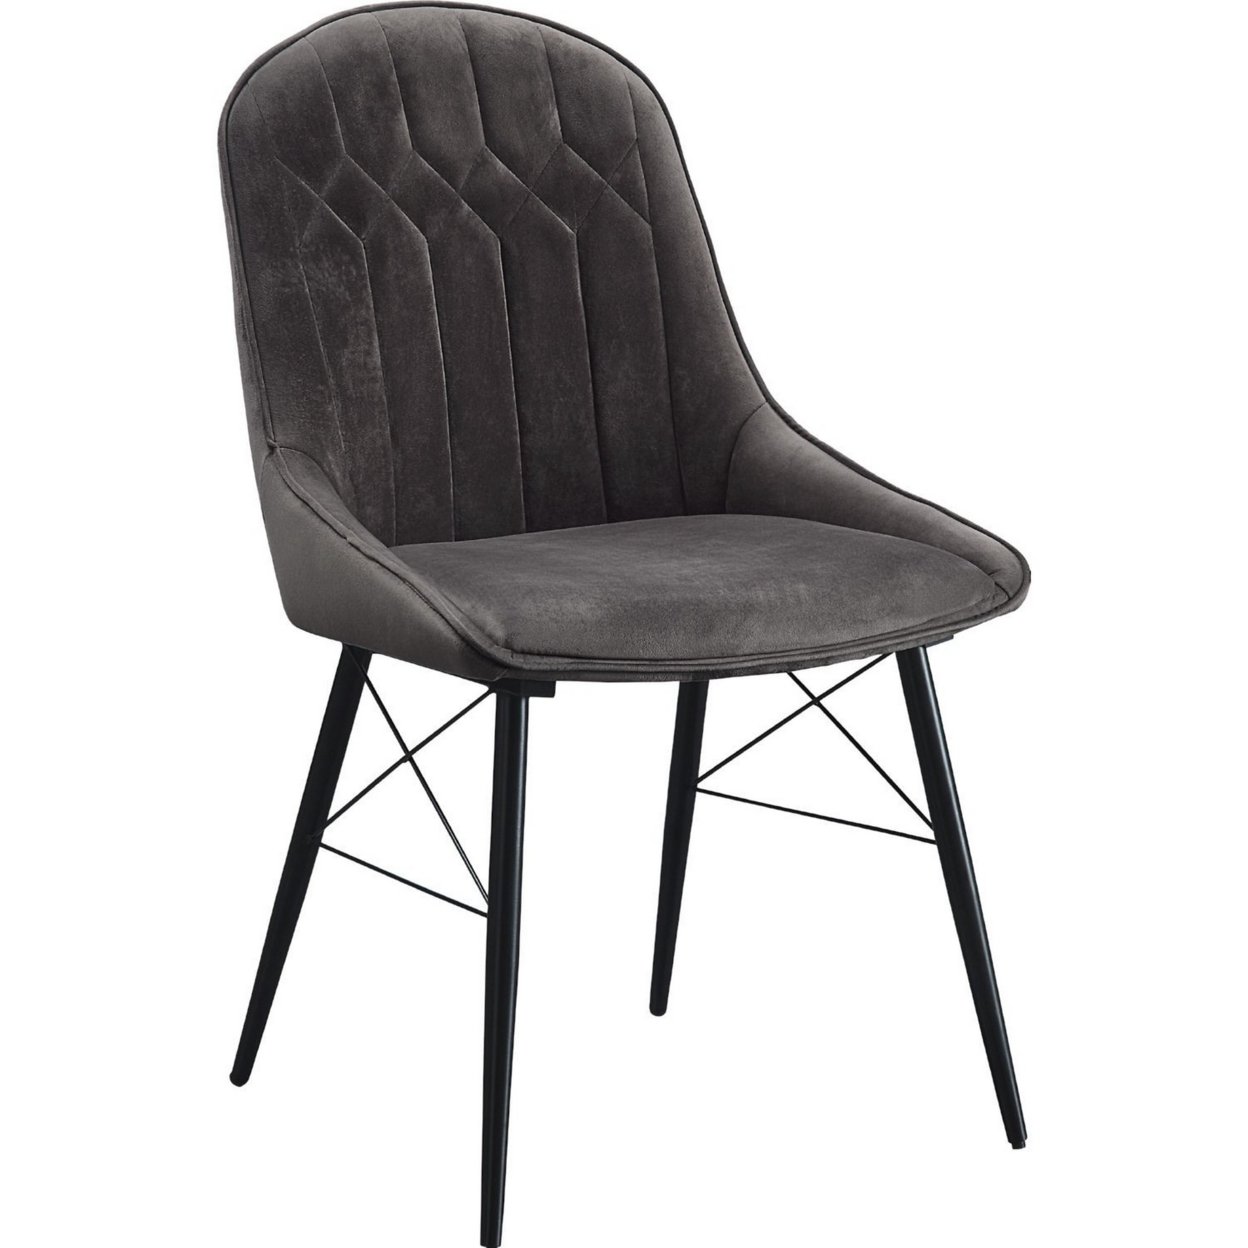 Fabric Upholstered Side Chair, Set Of 2, Gray And Black- Saltoro Sherpi